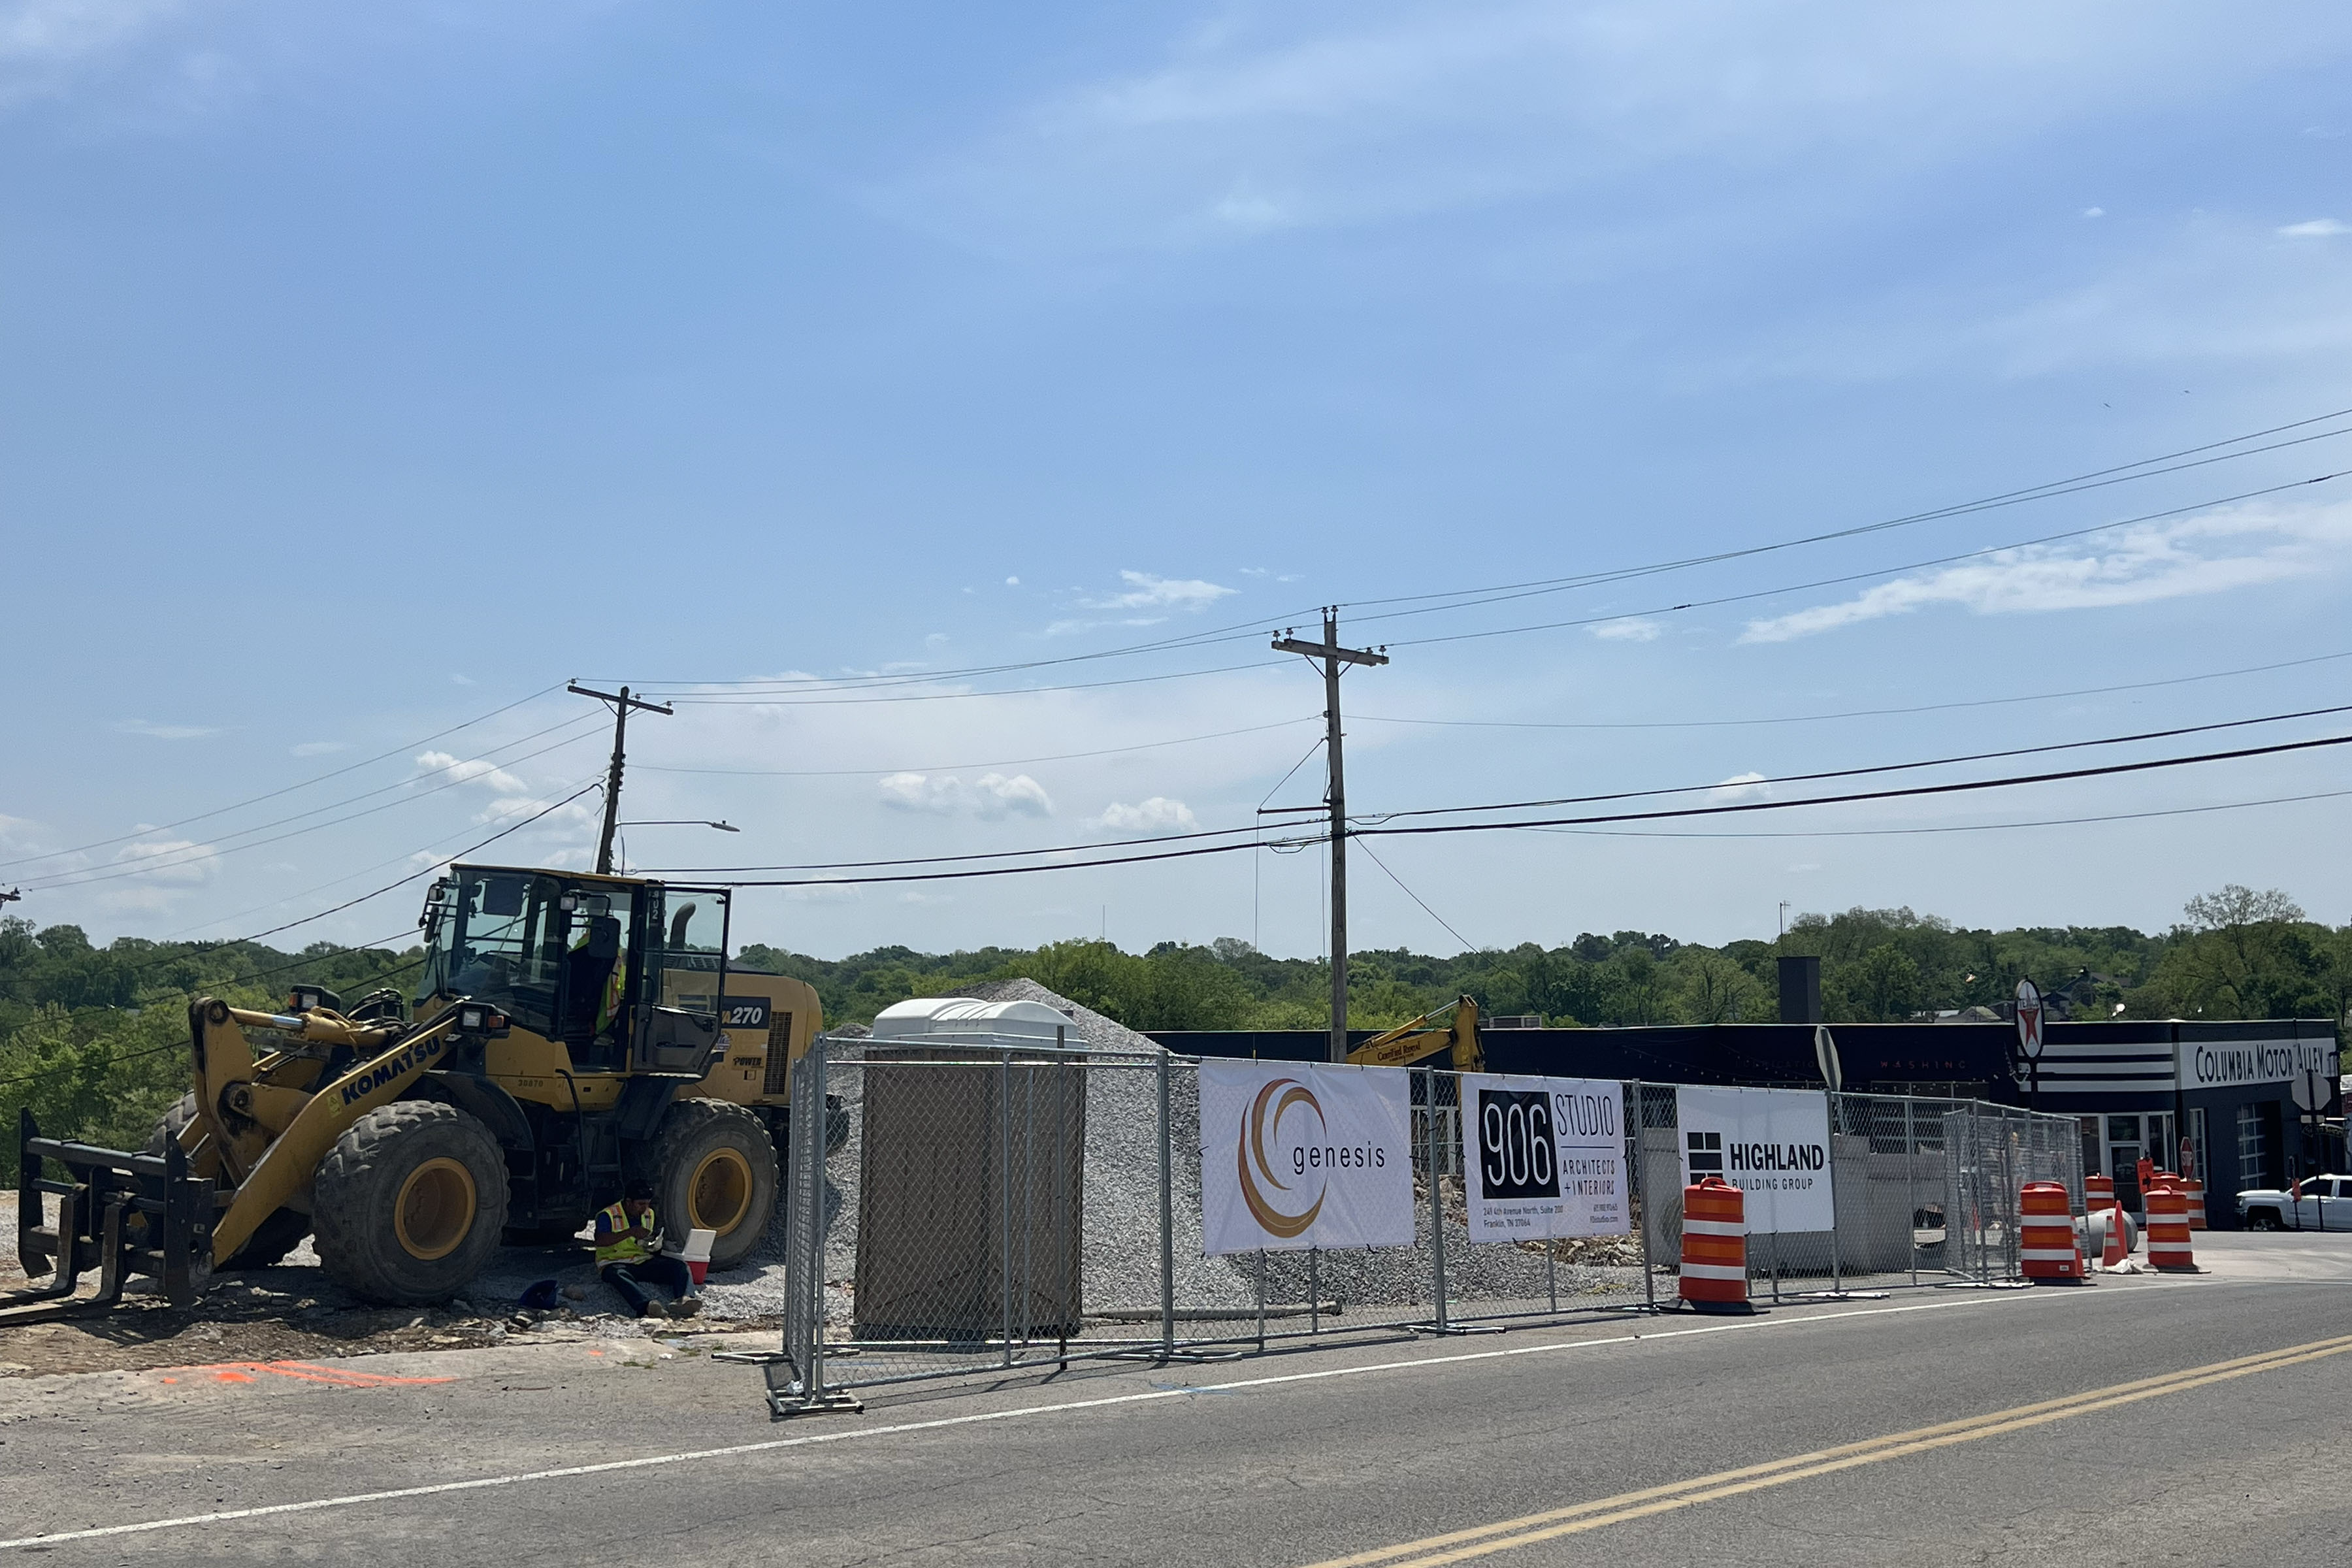 Construction in Columbia shows new condos are being built